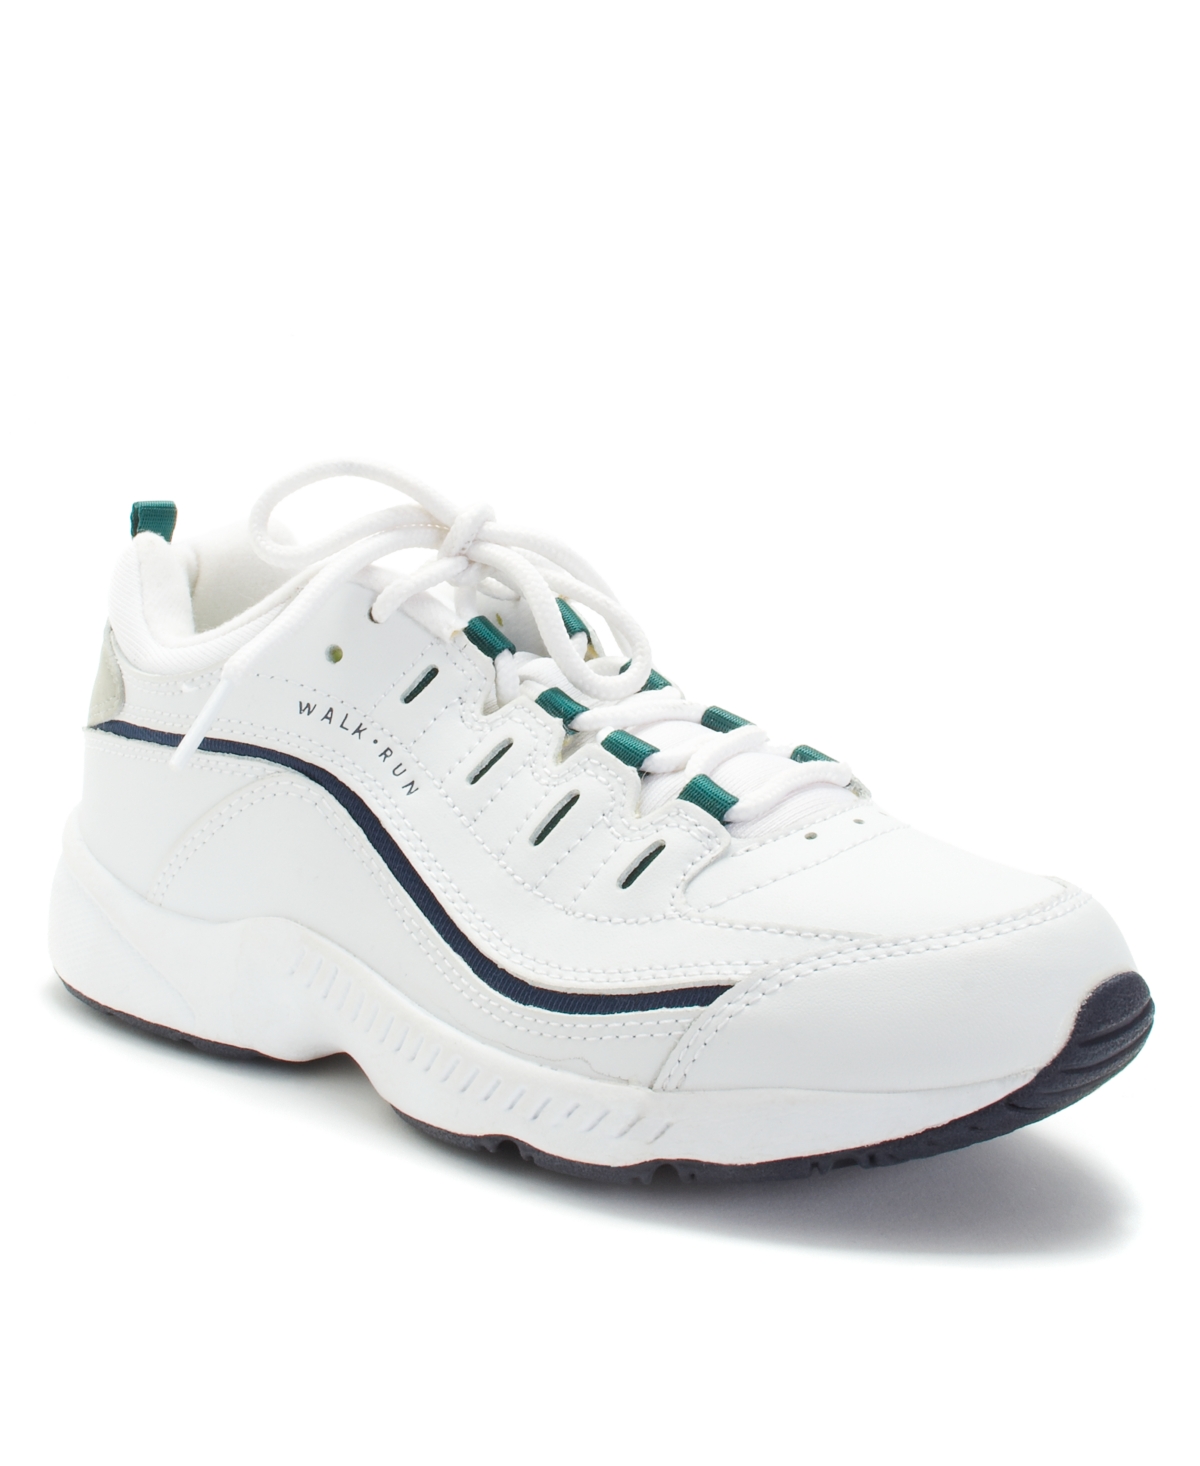 UPC 029005264484 product image for Easy Spirit Women's Romy Round Toe Casual Lace Up Walking Shoes Women's Shoes | upcitemdb.com